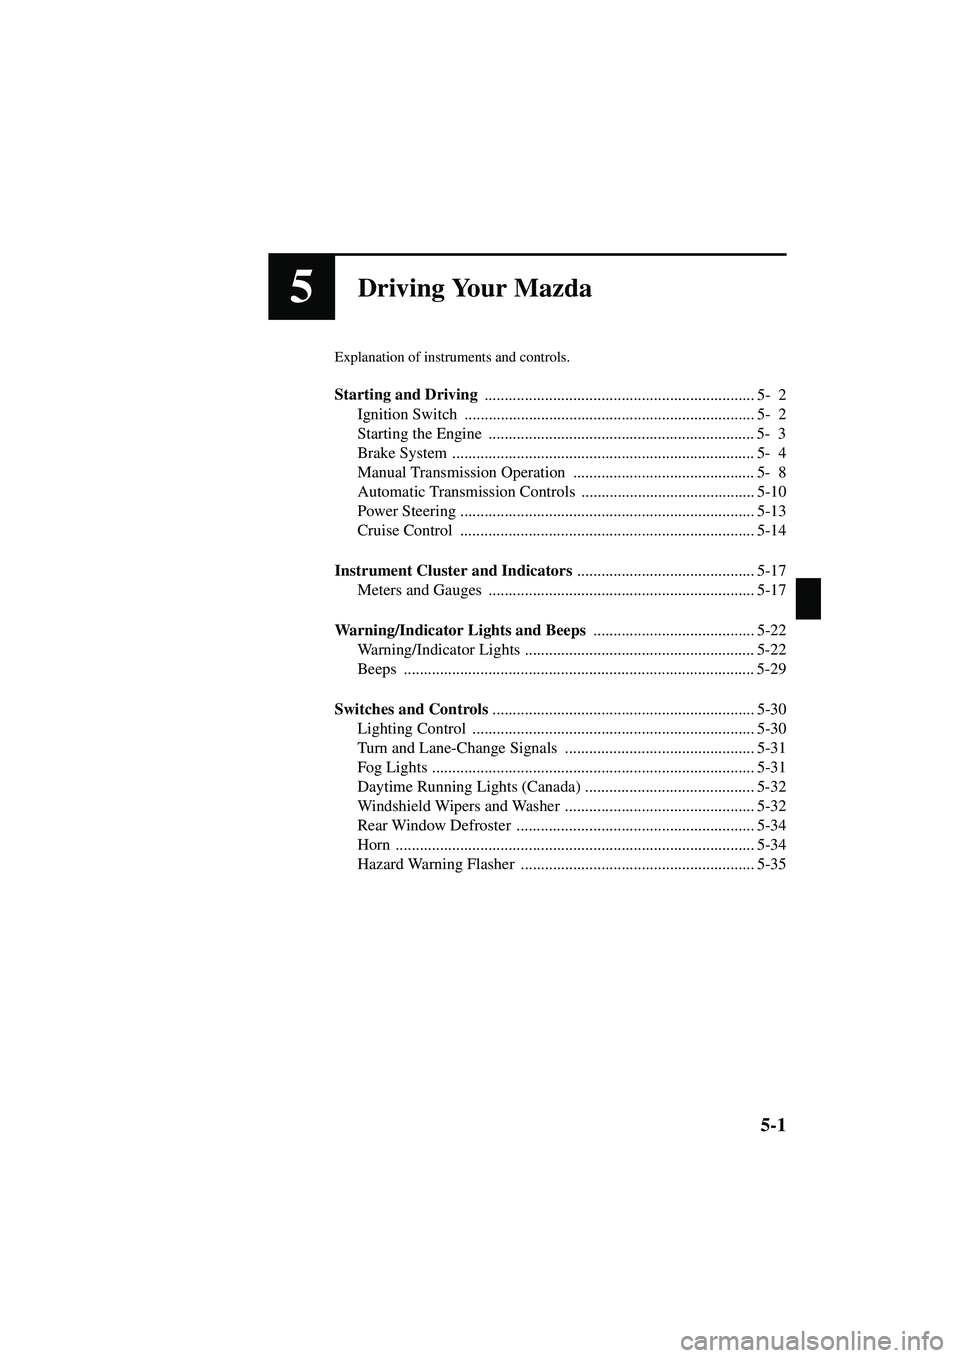 MAZDA MODEL MX-5 MIATA 2003  Owners Manual 5-1
Form No. 8R09-EA-02G
5Driving Your Mazda
Explanation of instruments and controls.
Starting and Driving ................................................................... 5- 2
Ignition Switch  ...